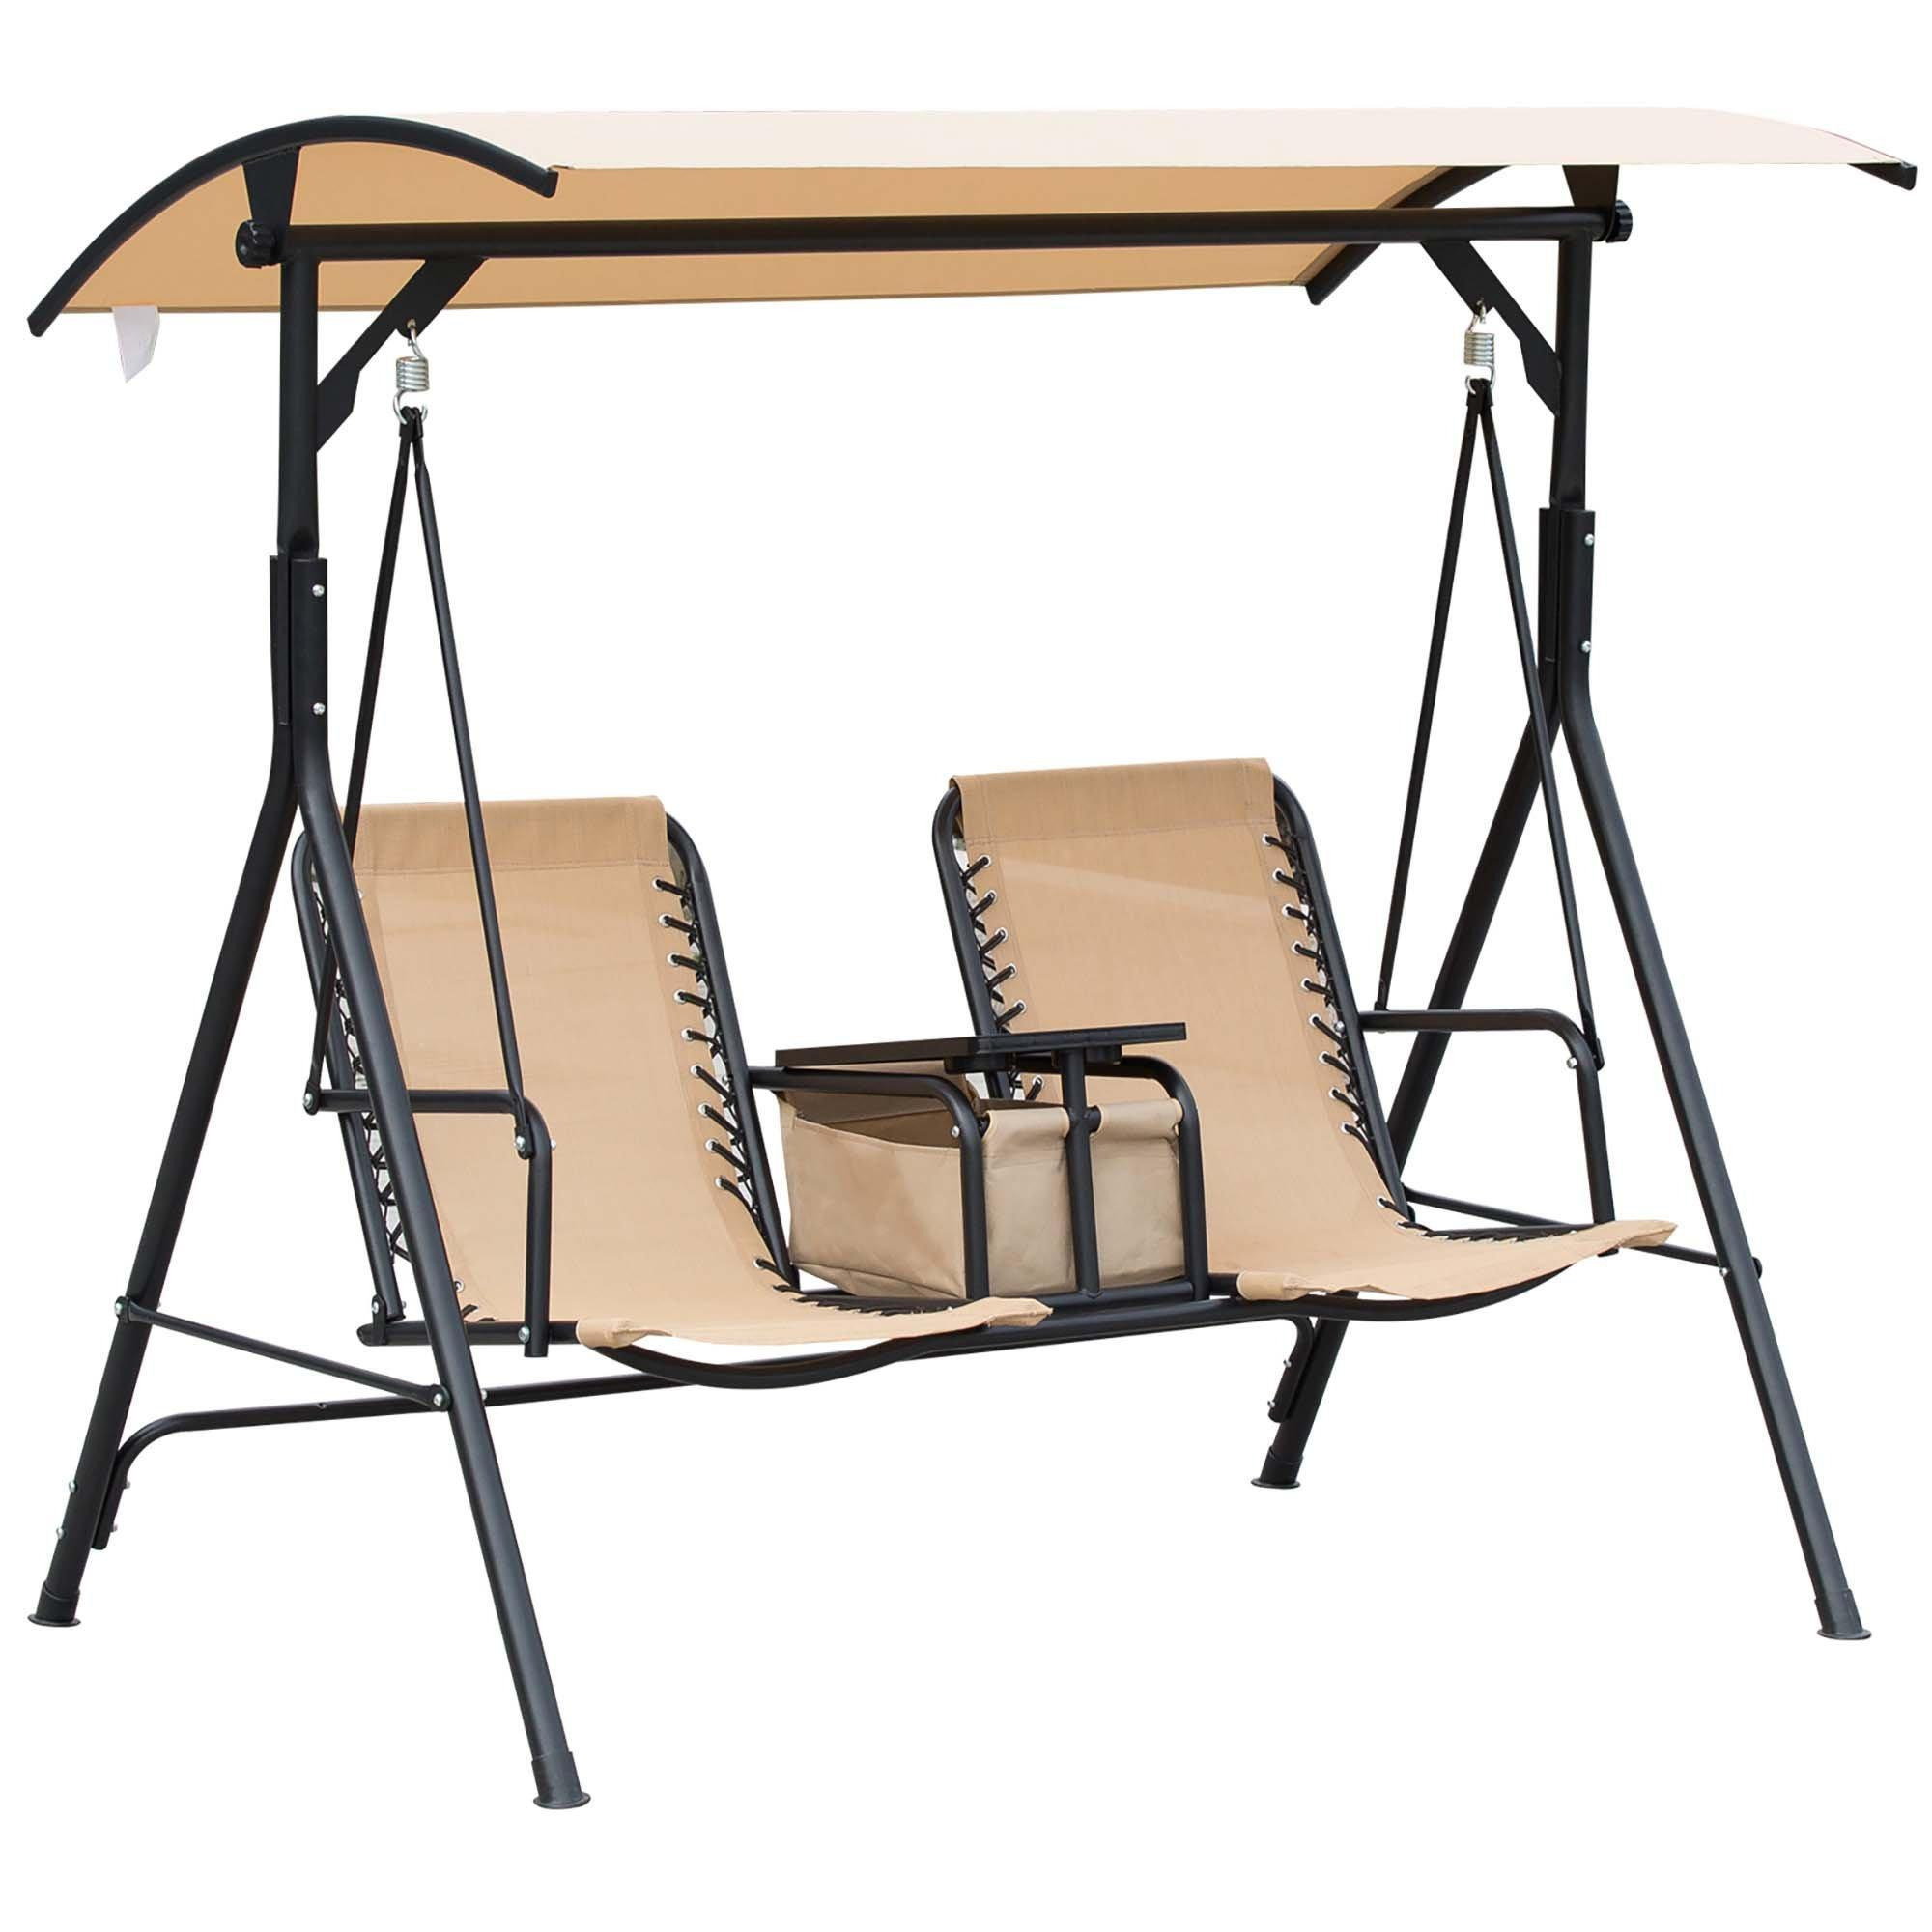 2 Person Swing Chair with Pivot Table and Middle Storage Console - image 1